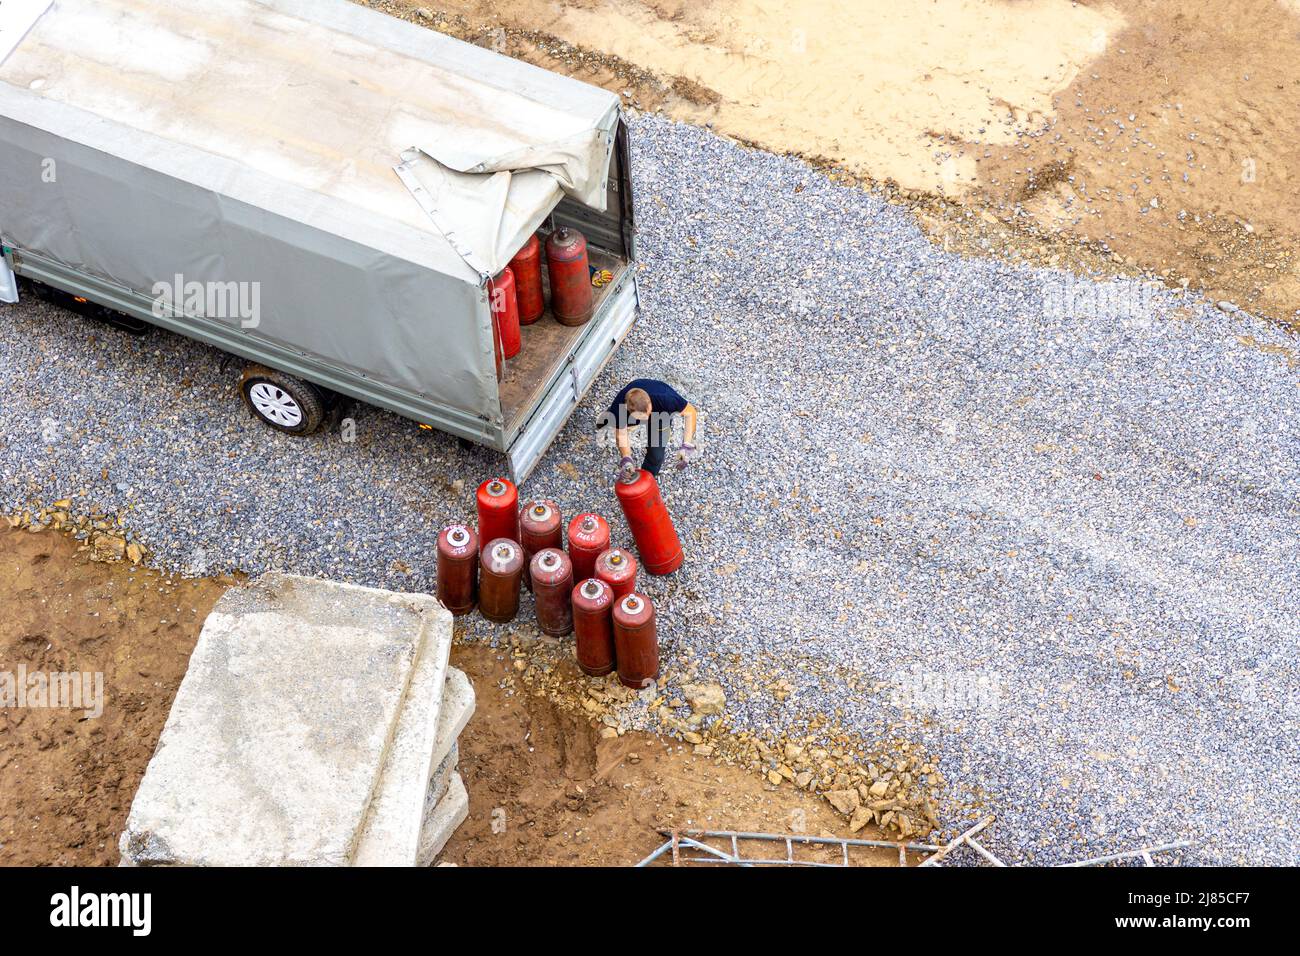 A man loads red gas cylinders into the body of a truck under an awning, selective focus Stock Photo